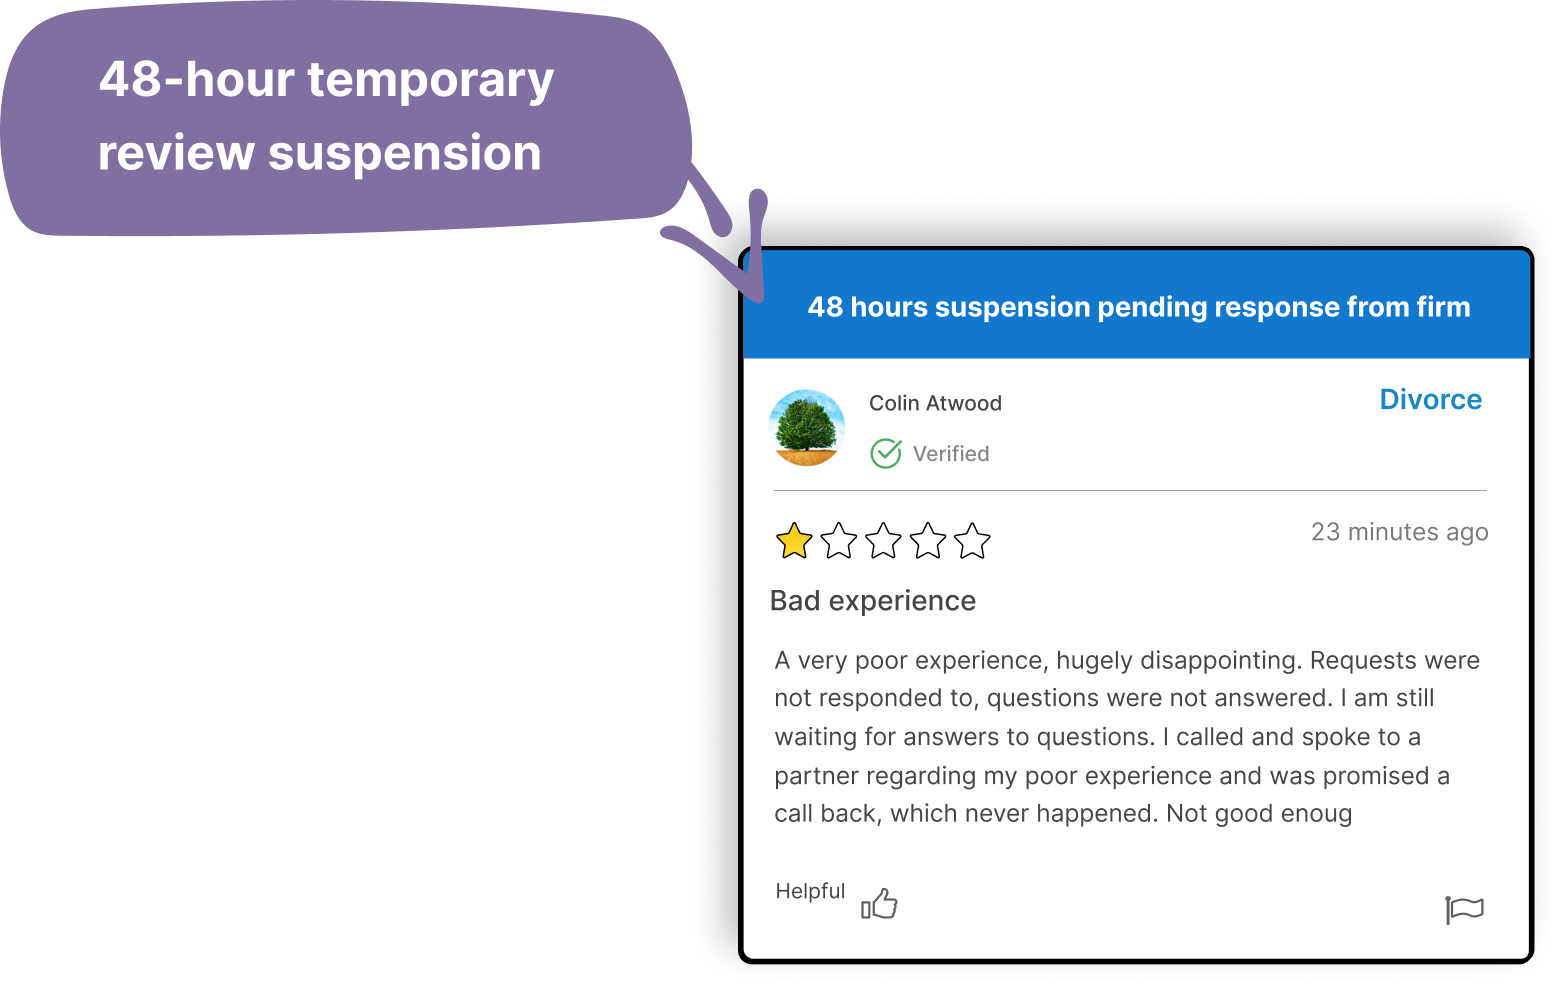 Tools to respond to negative reviews - 48-hour review suspension